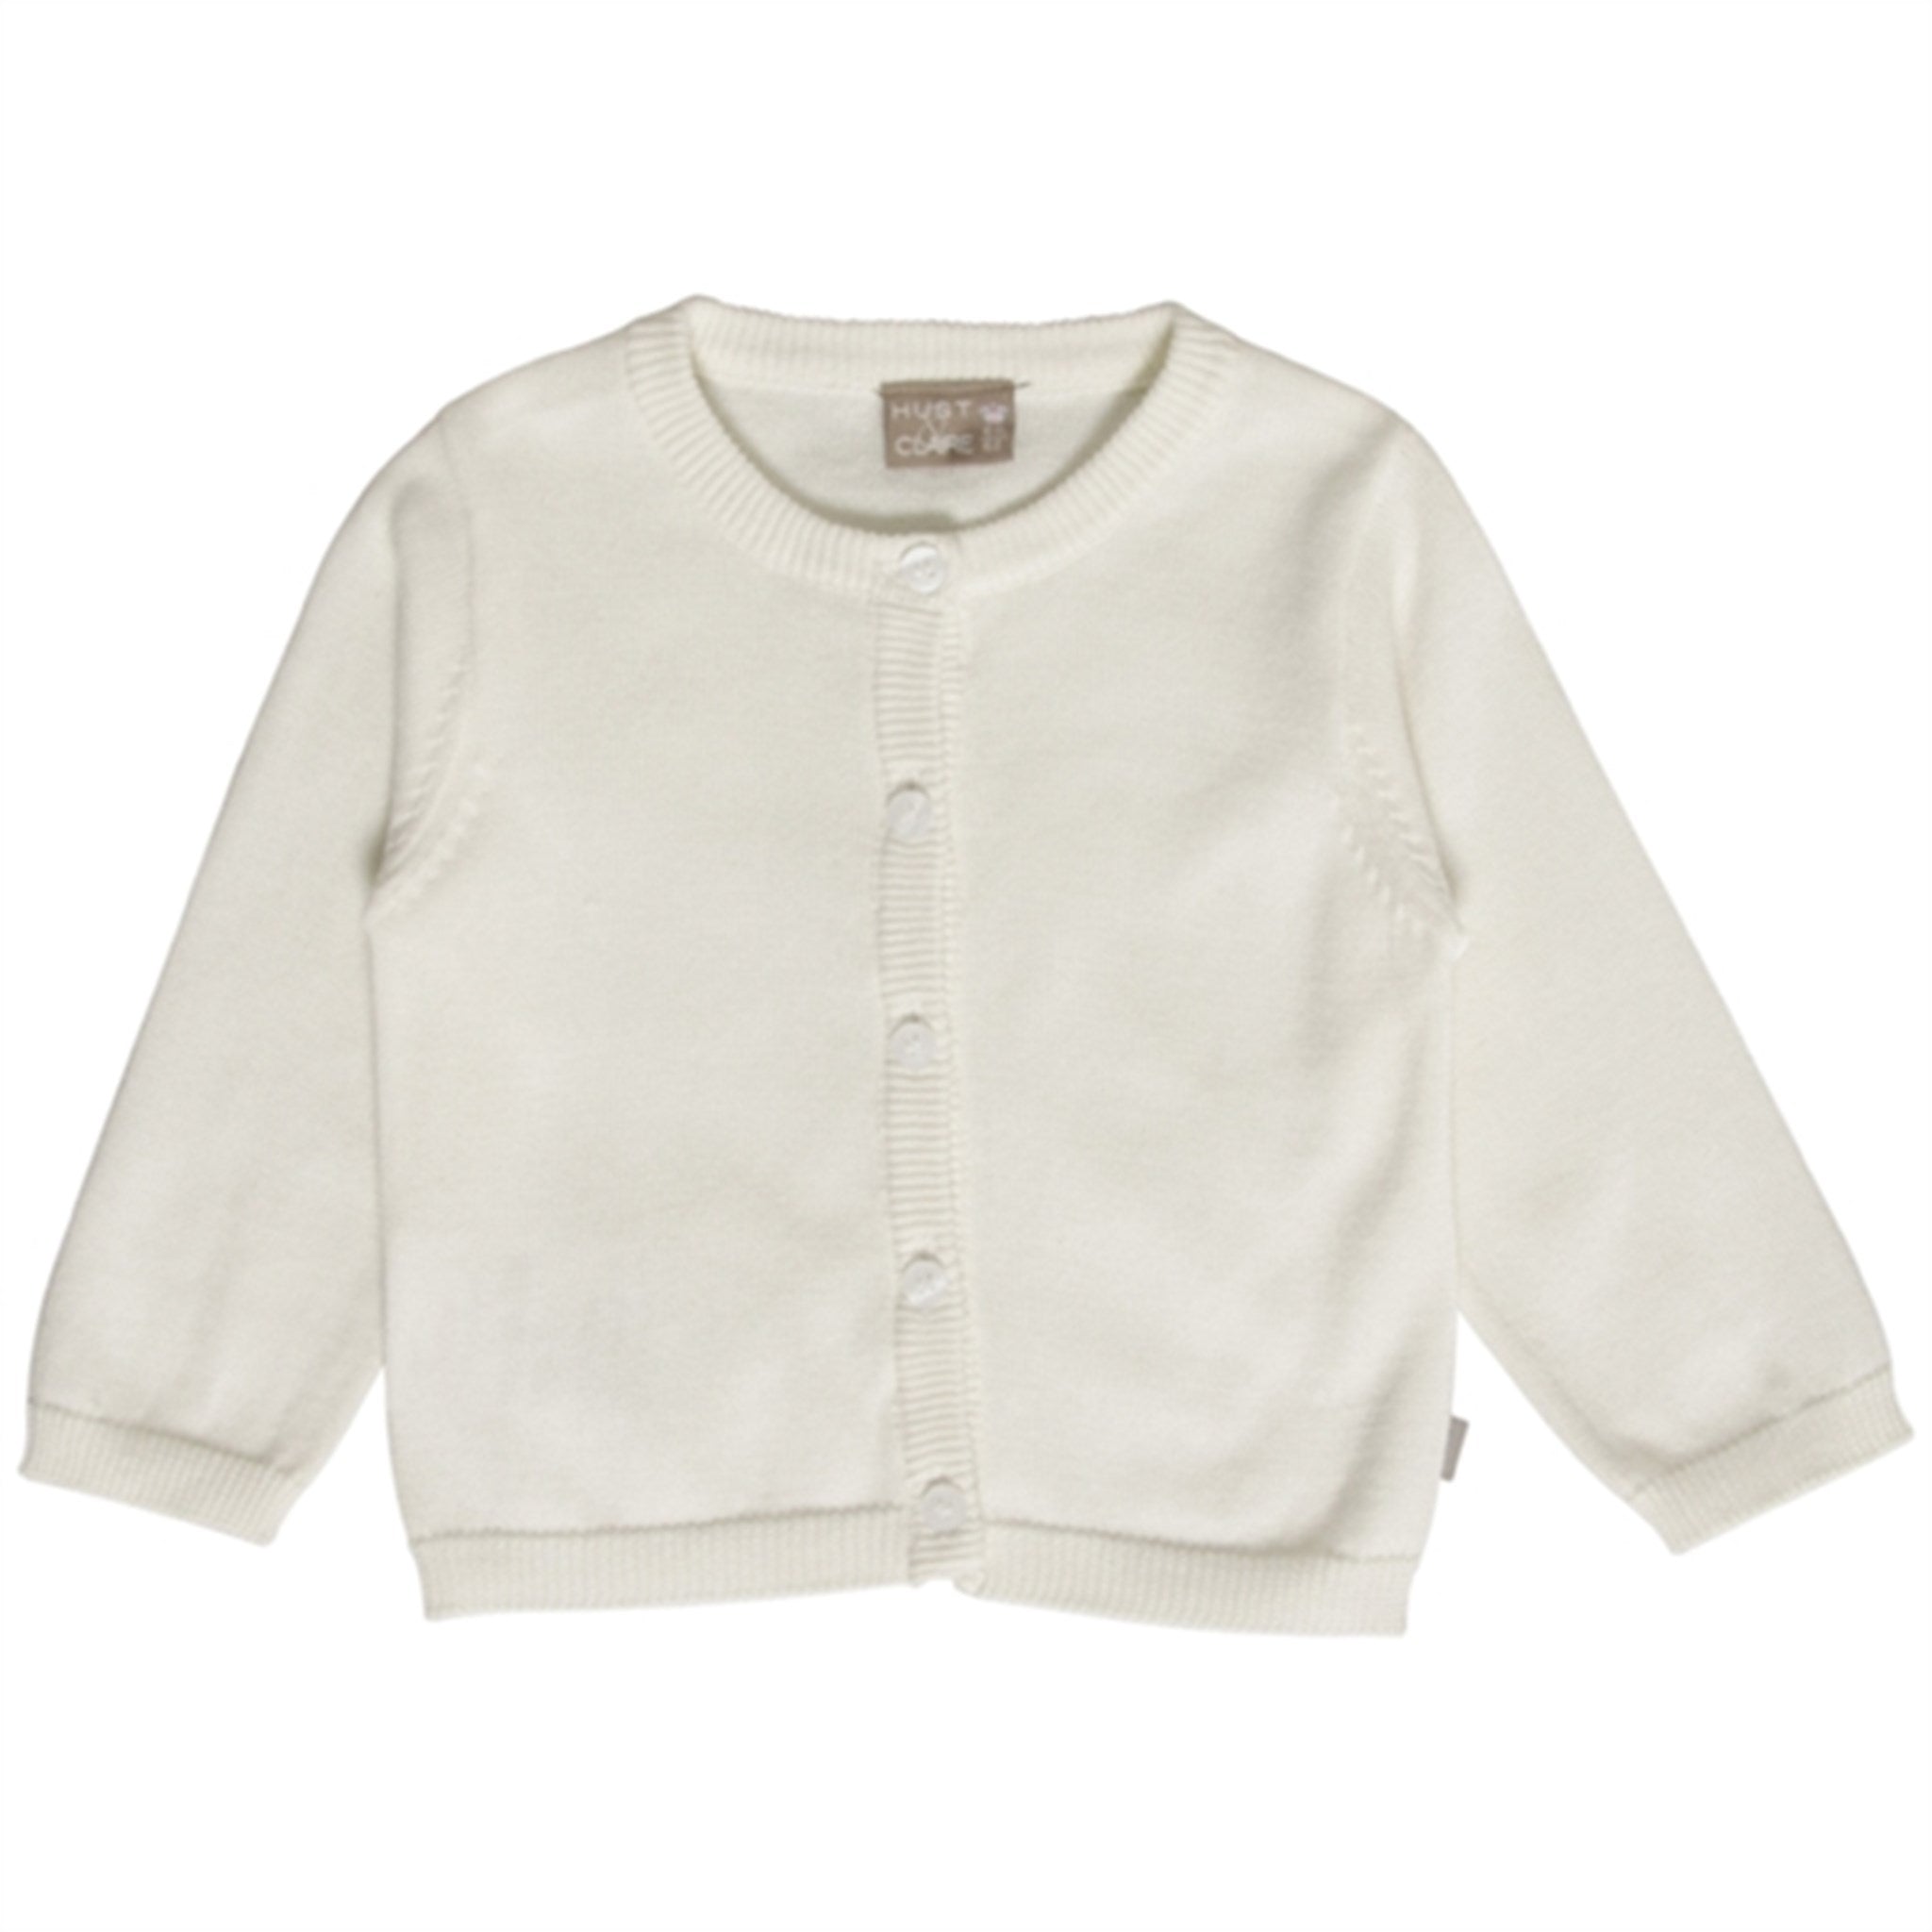 Hust & Claire Baby Ivory Claire Cardigan NOOS - Str. 62